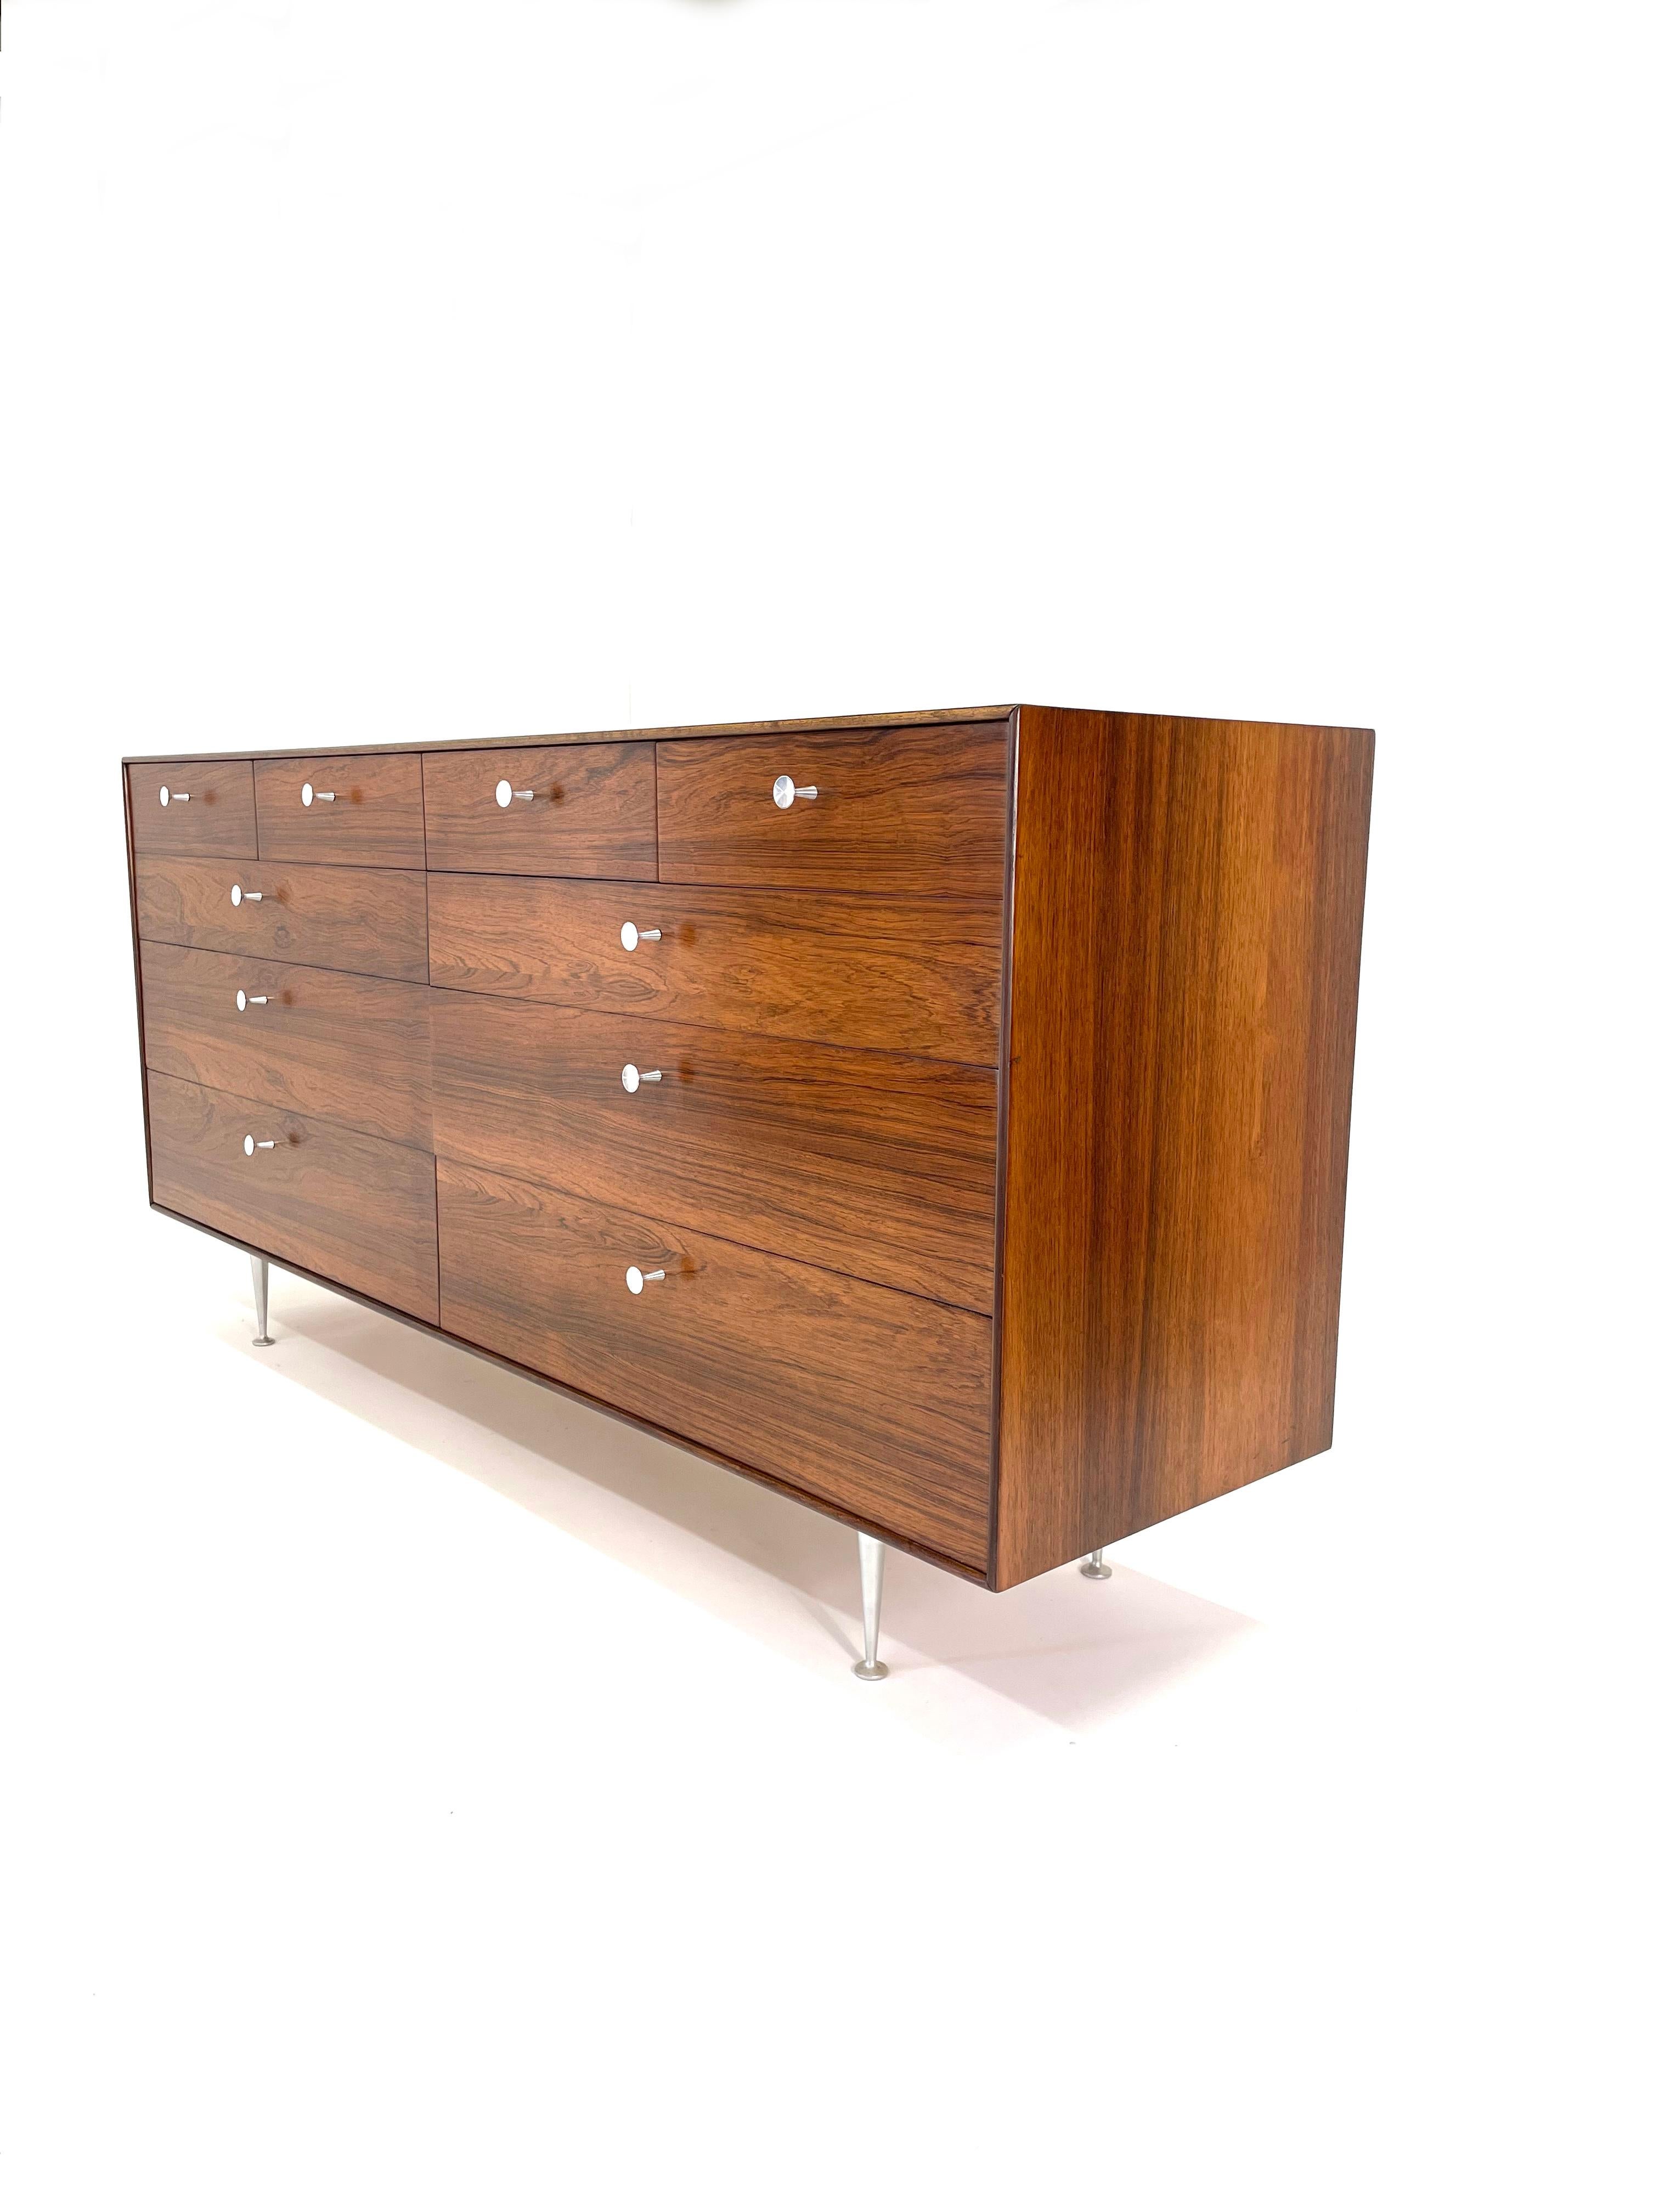 This George Nelson Rosewood Thin Edge Double Dresser for Herman Miller is as elegant and extraordinary as it comes. Newly refinished 10 drawer dresser with original aluminum pulls on tapered aluminum legs. This piece is a classic understated Modern